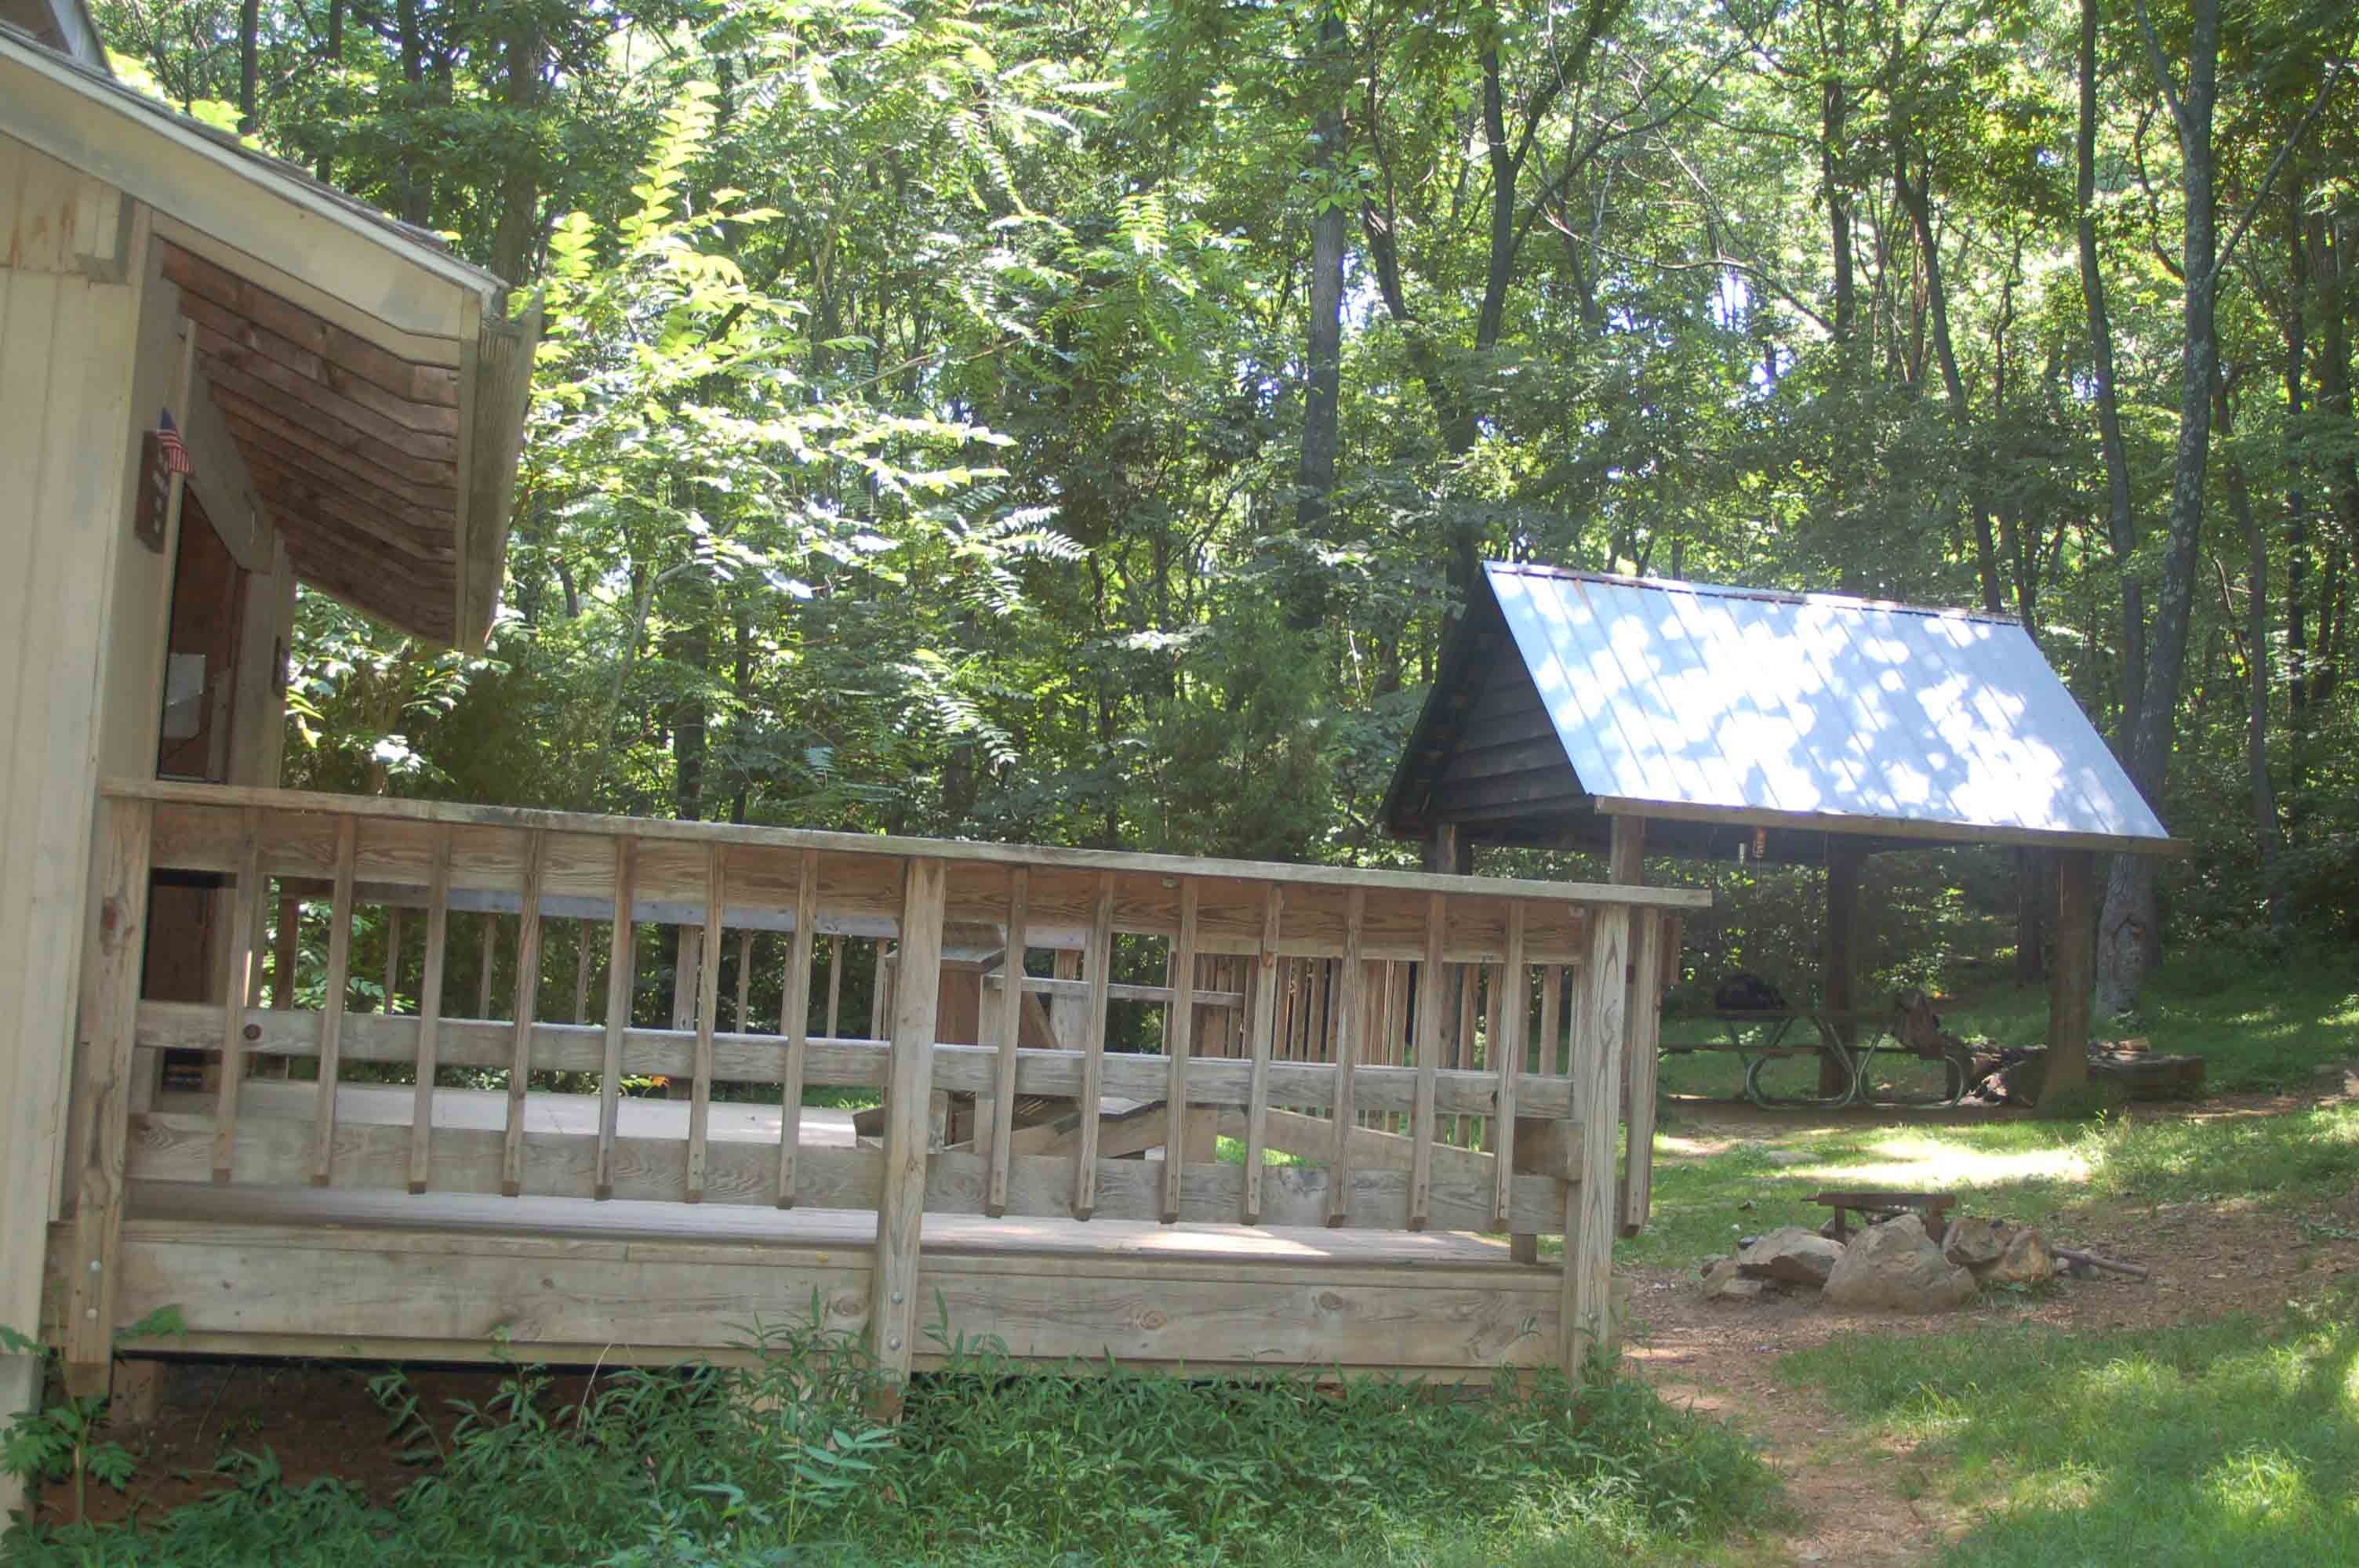 Side view of Denton Shelter showing covered picnic area. (mile 3.0)  Courtesy ideanna656@aol.com